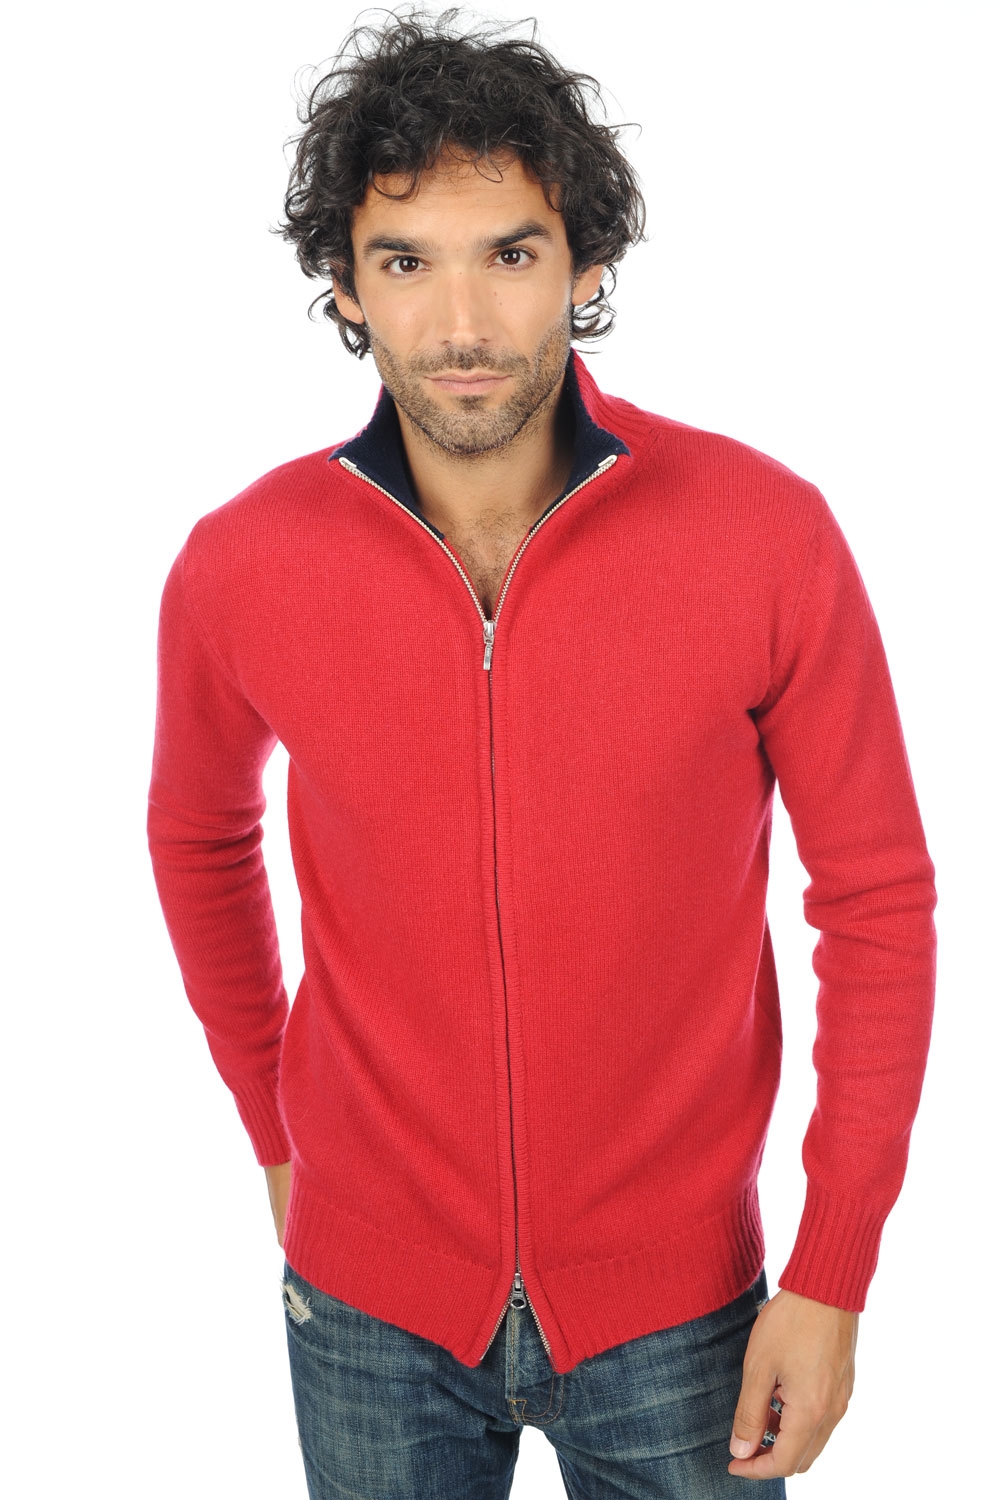 Cashmere men chunky sweater maxime blood red dress blue s